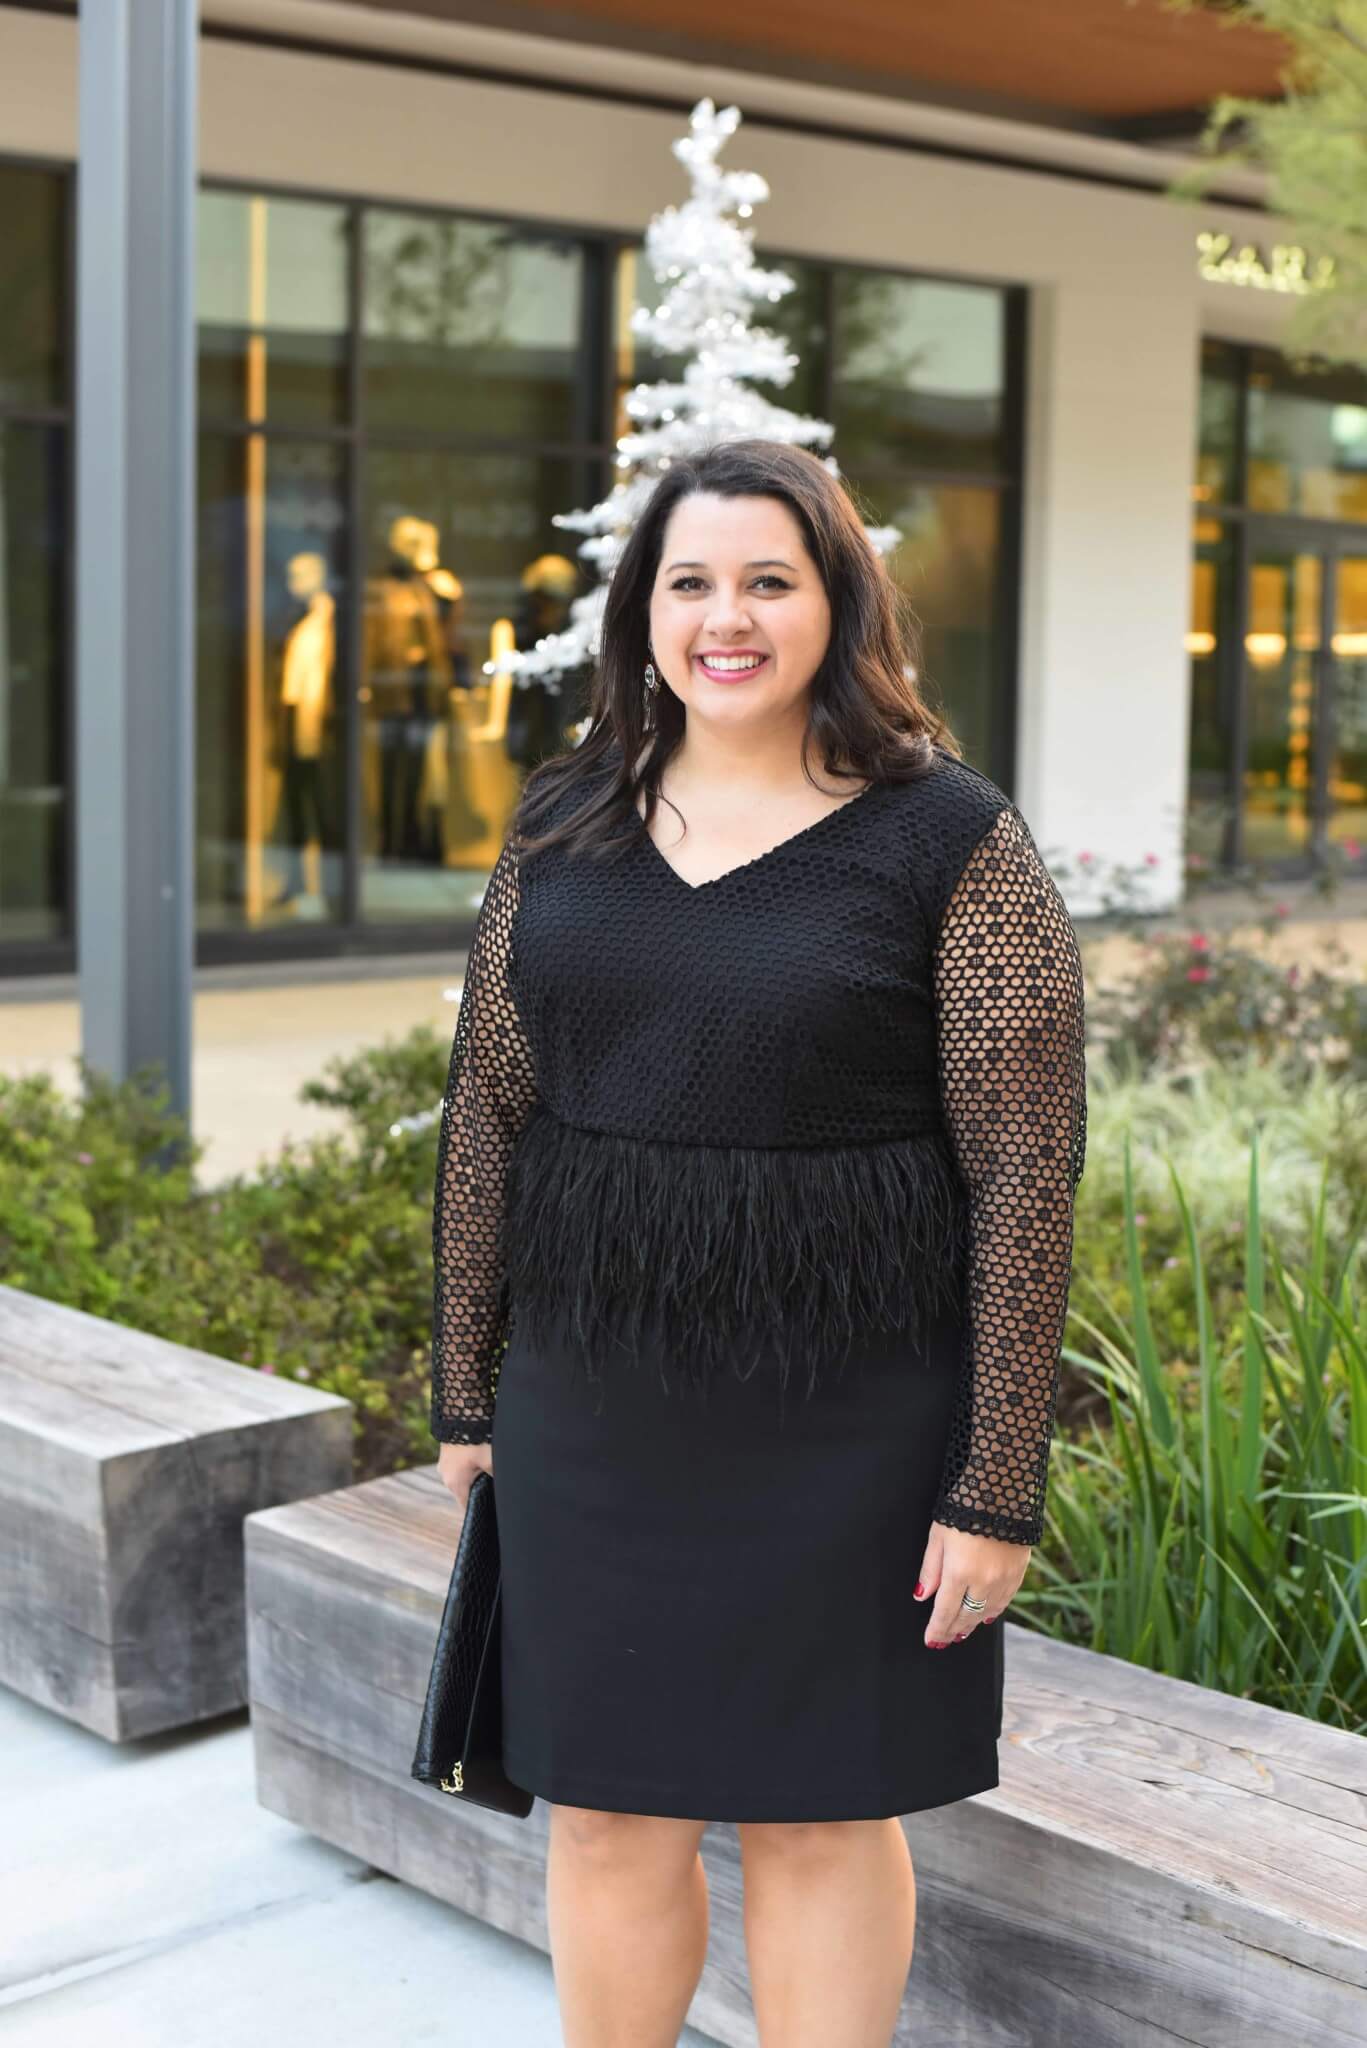 Emily from Something Gold, Something Blue is sharing her formal holiday party outfit including fabulous nude pumps, a gorgeous black lace and feather peplum dress and red crystal statement earrings. - @emilySGSB